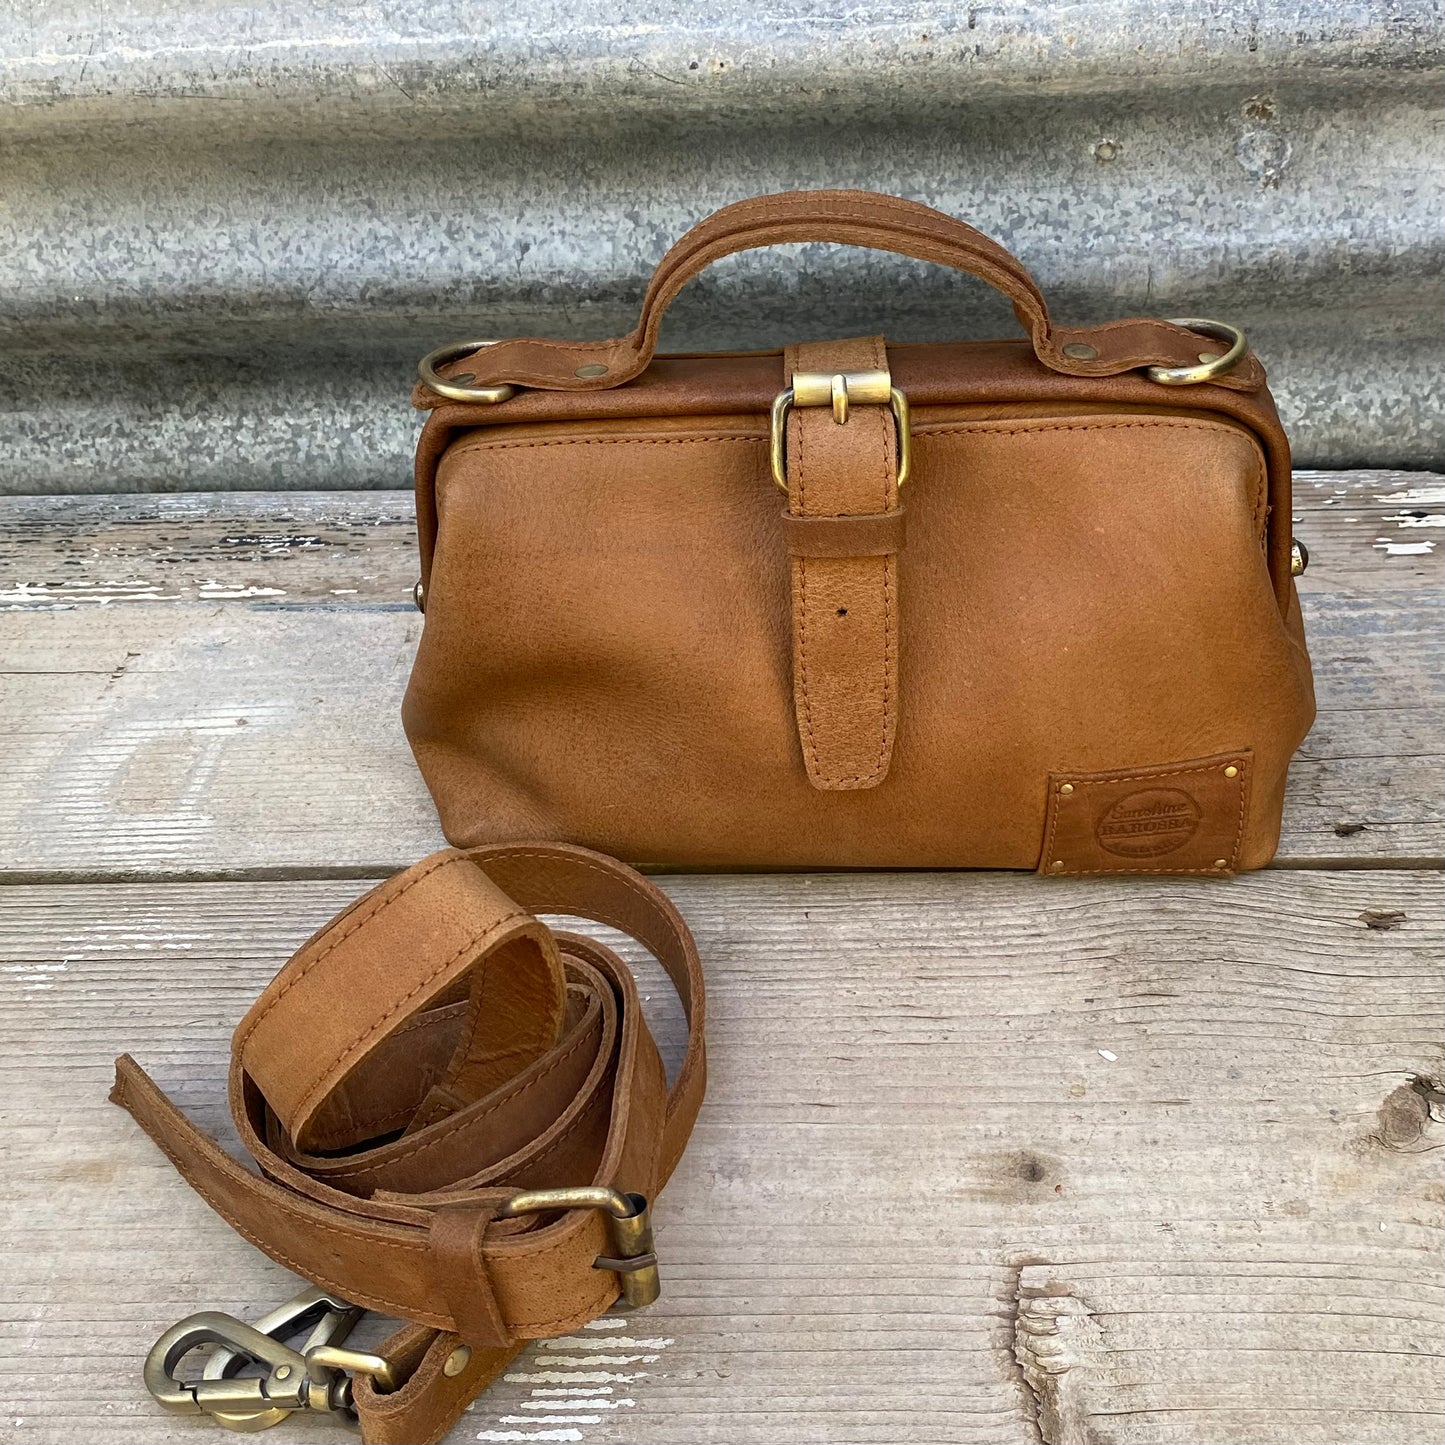 The Wee Gladstone / Doctors Bag